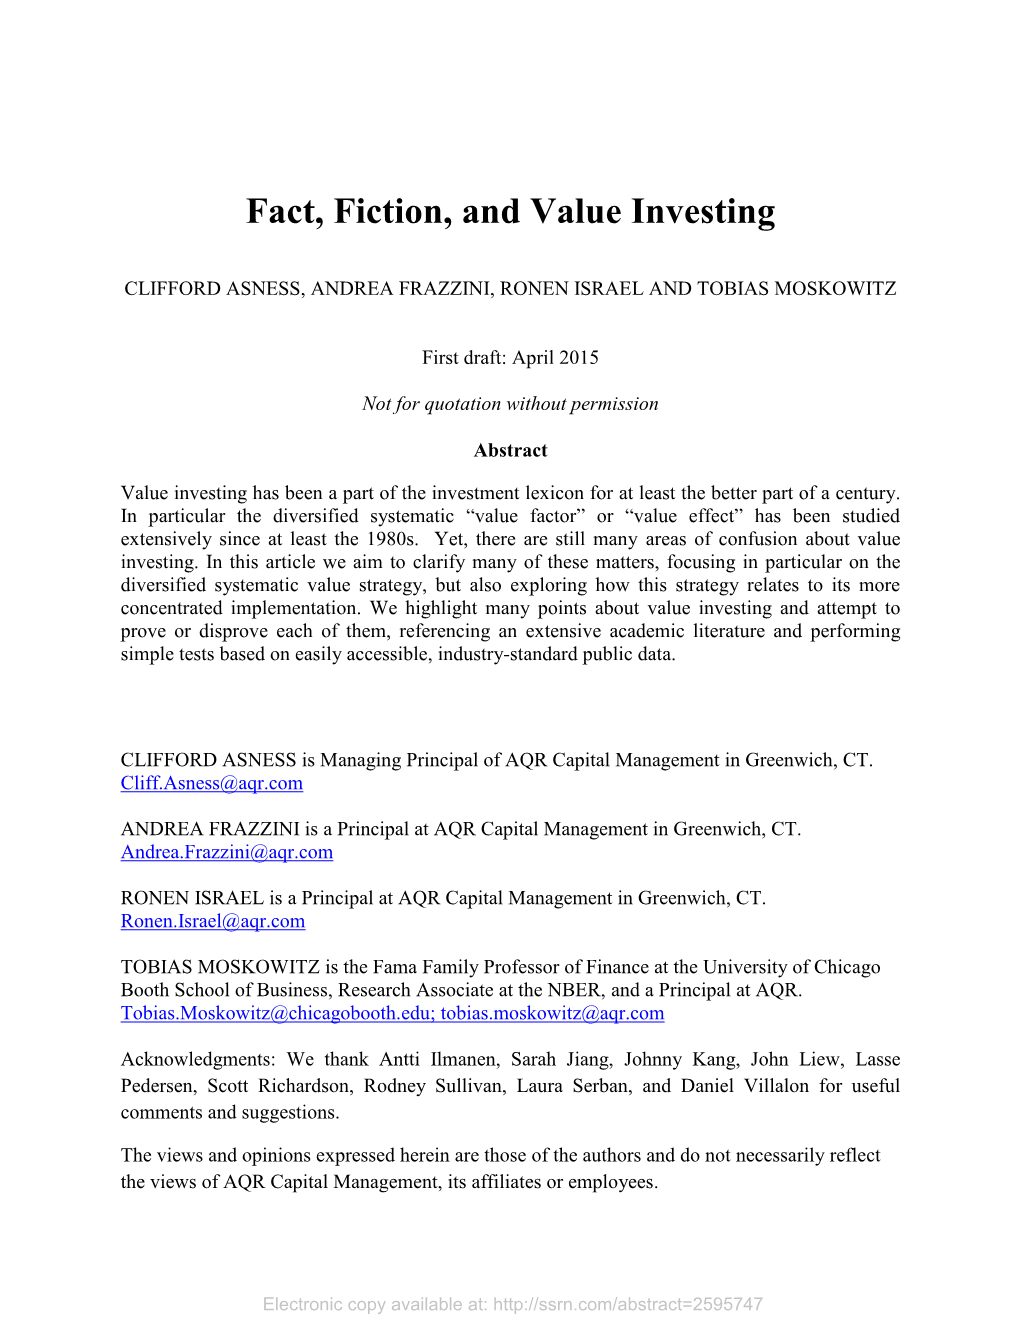 Fact, Fiction, and Value Investing